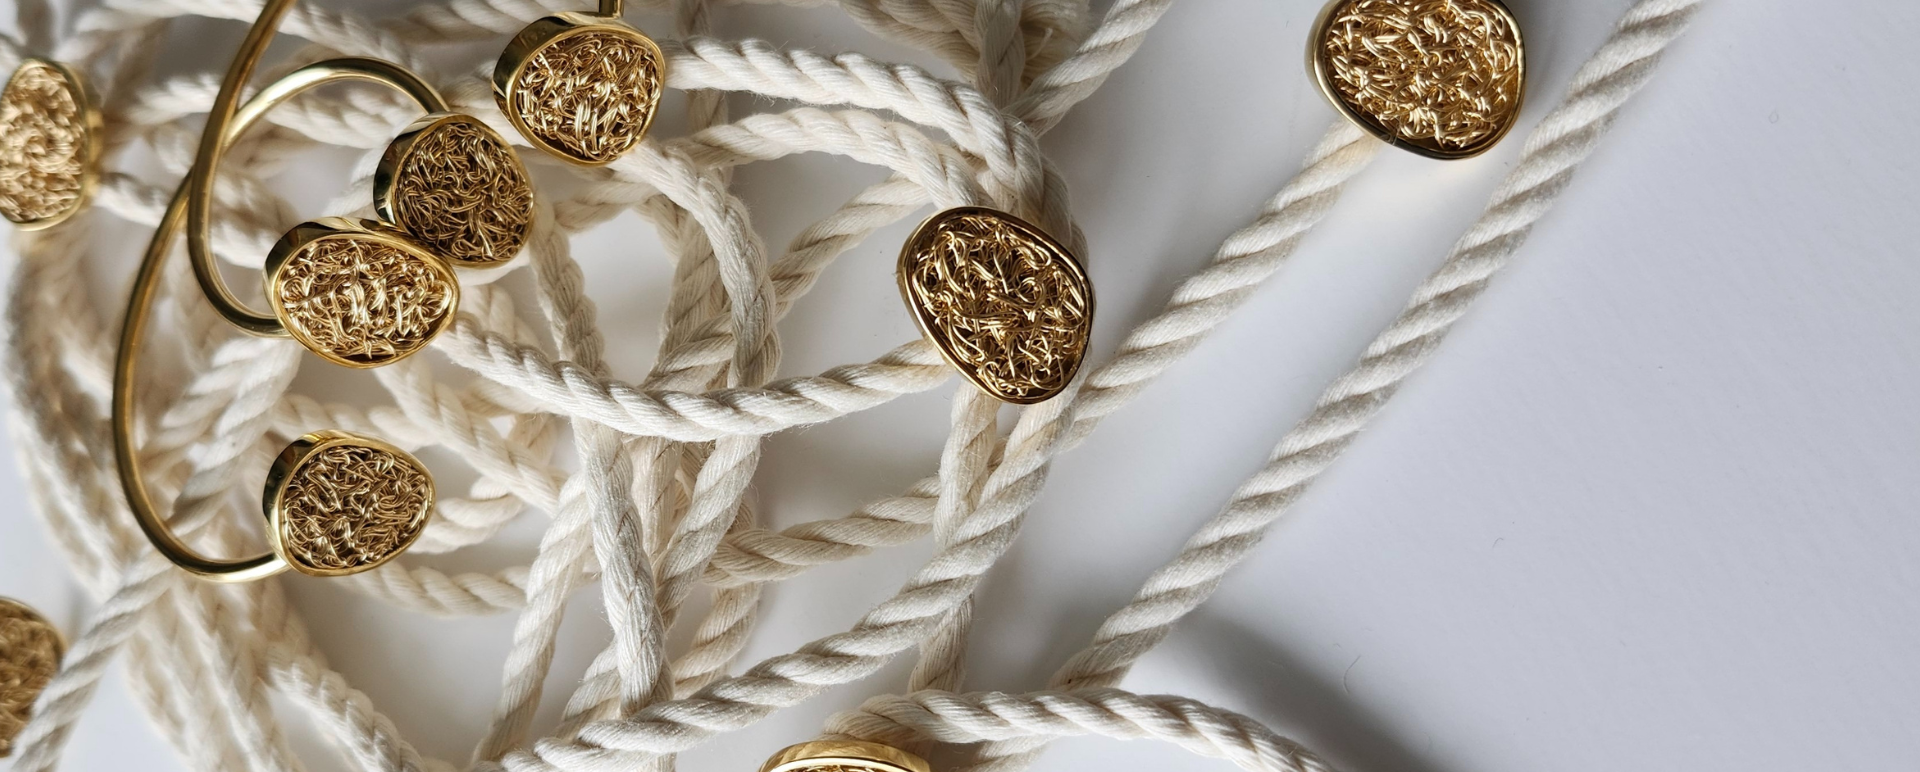 Hand made gold bracelets with crochet details